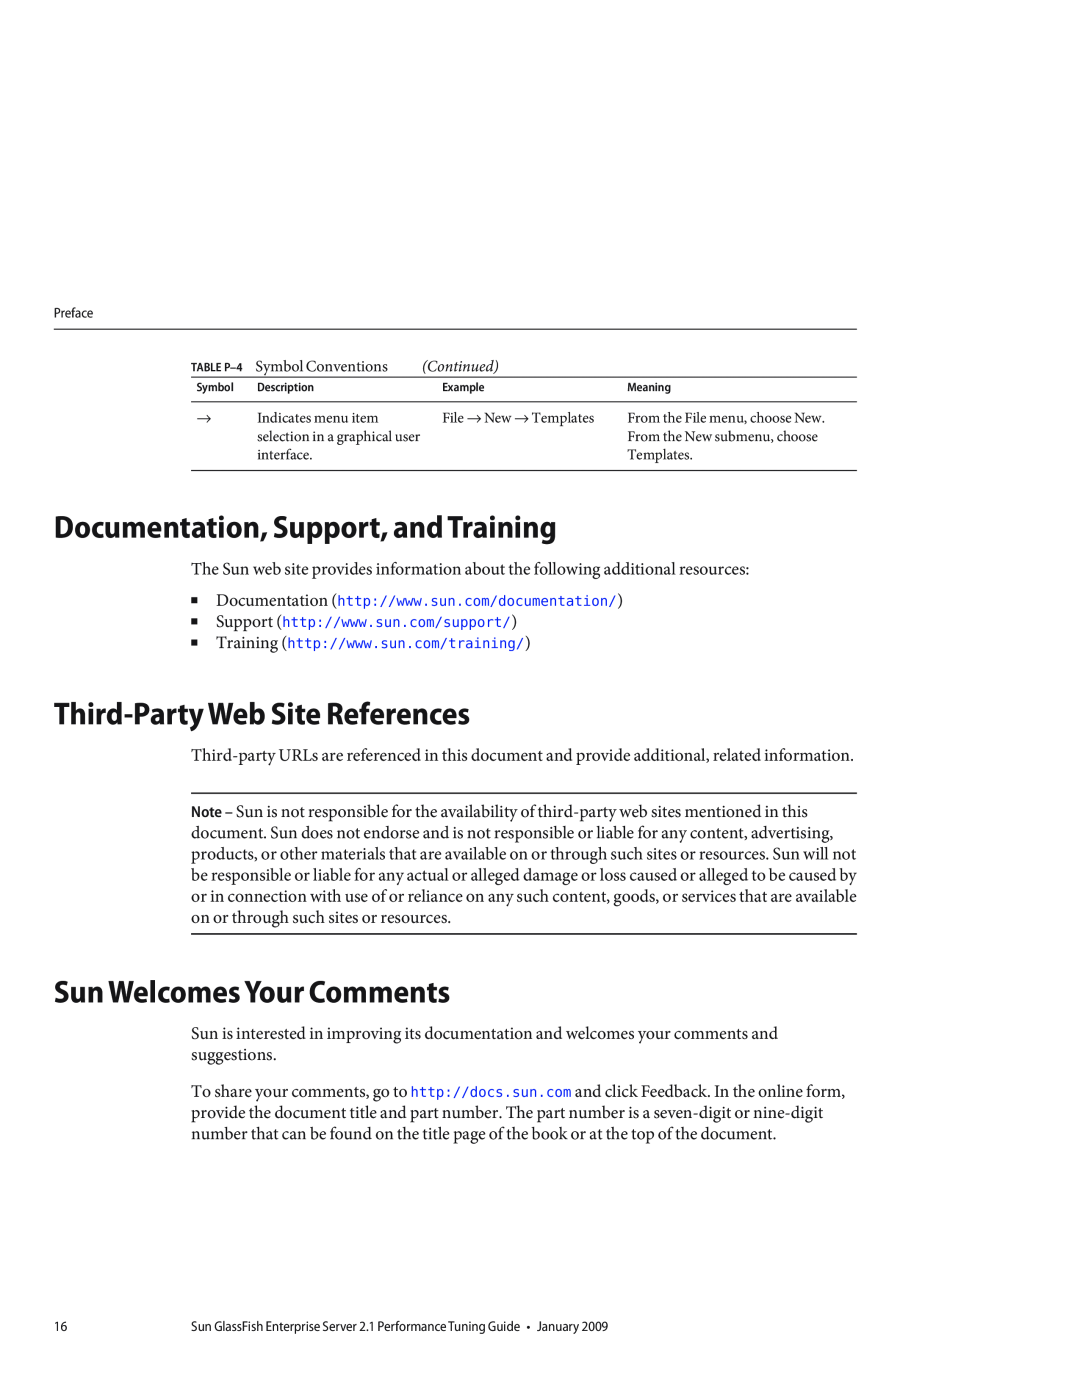 Sun Microsystems 820434310 Documentation, Support, and Training, Third-Party Web Site References, Indicates menu item 